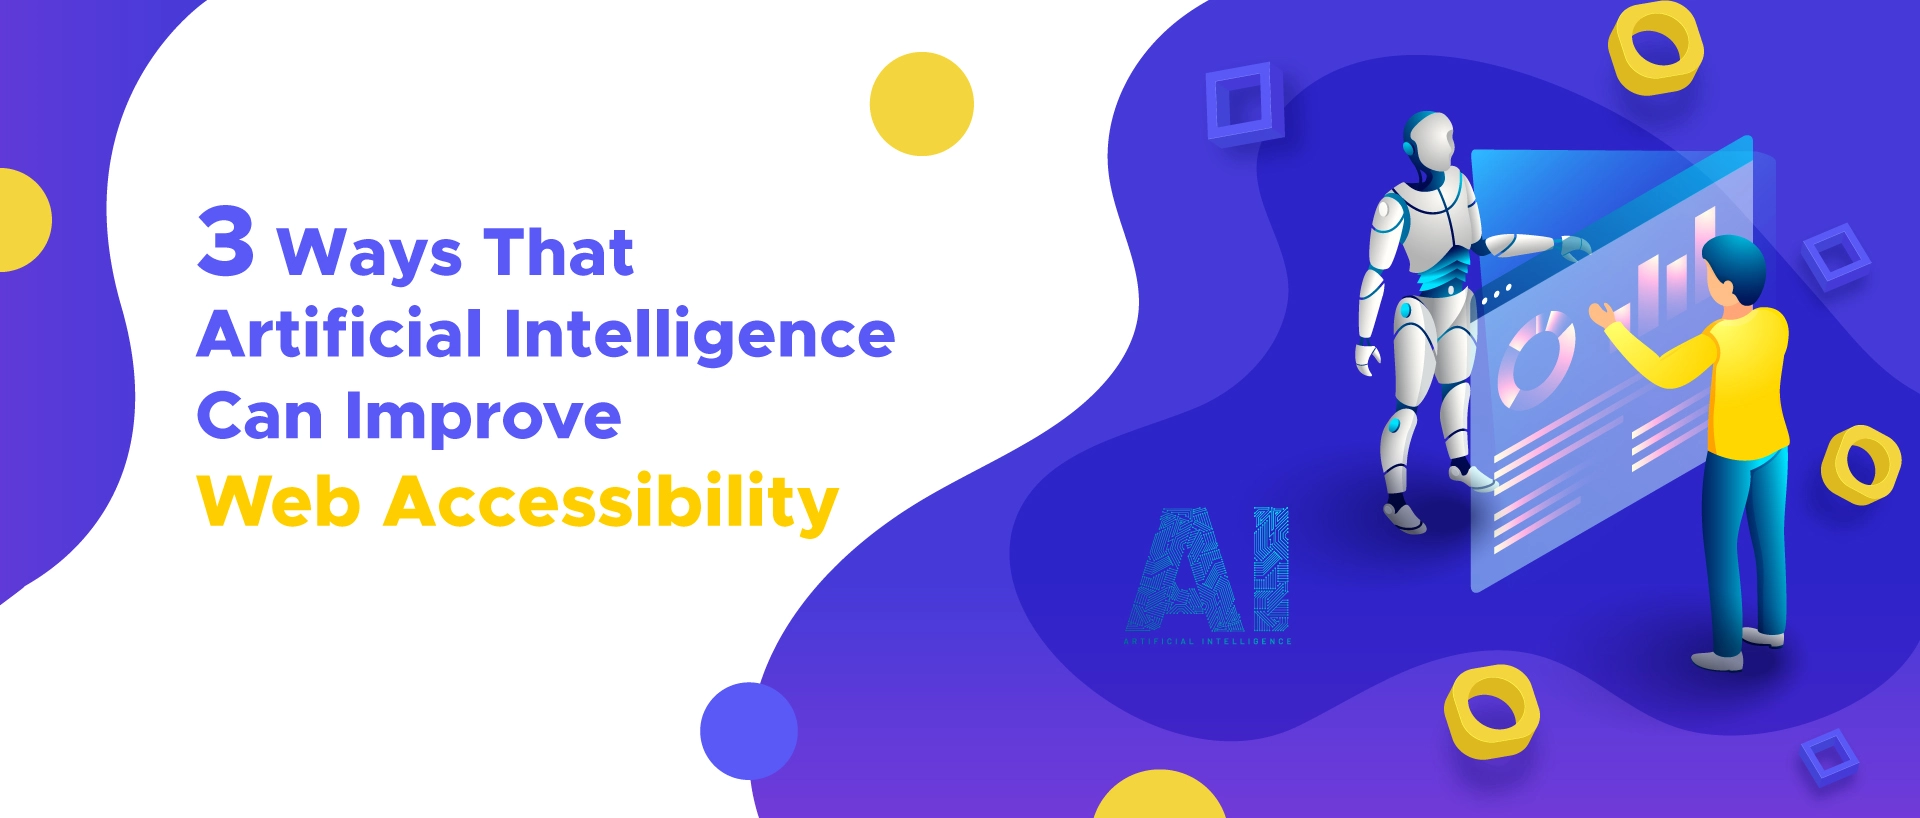 3 Ways That Artificial Intelligence Can Improve Web Accessibility